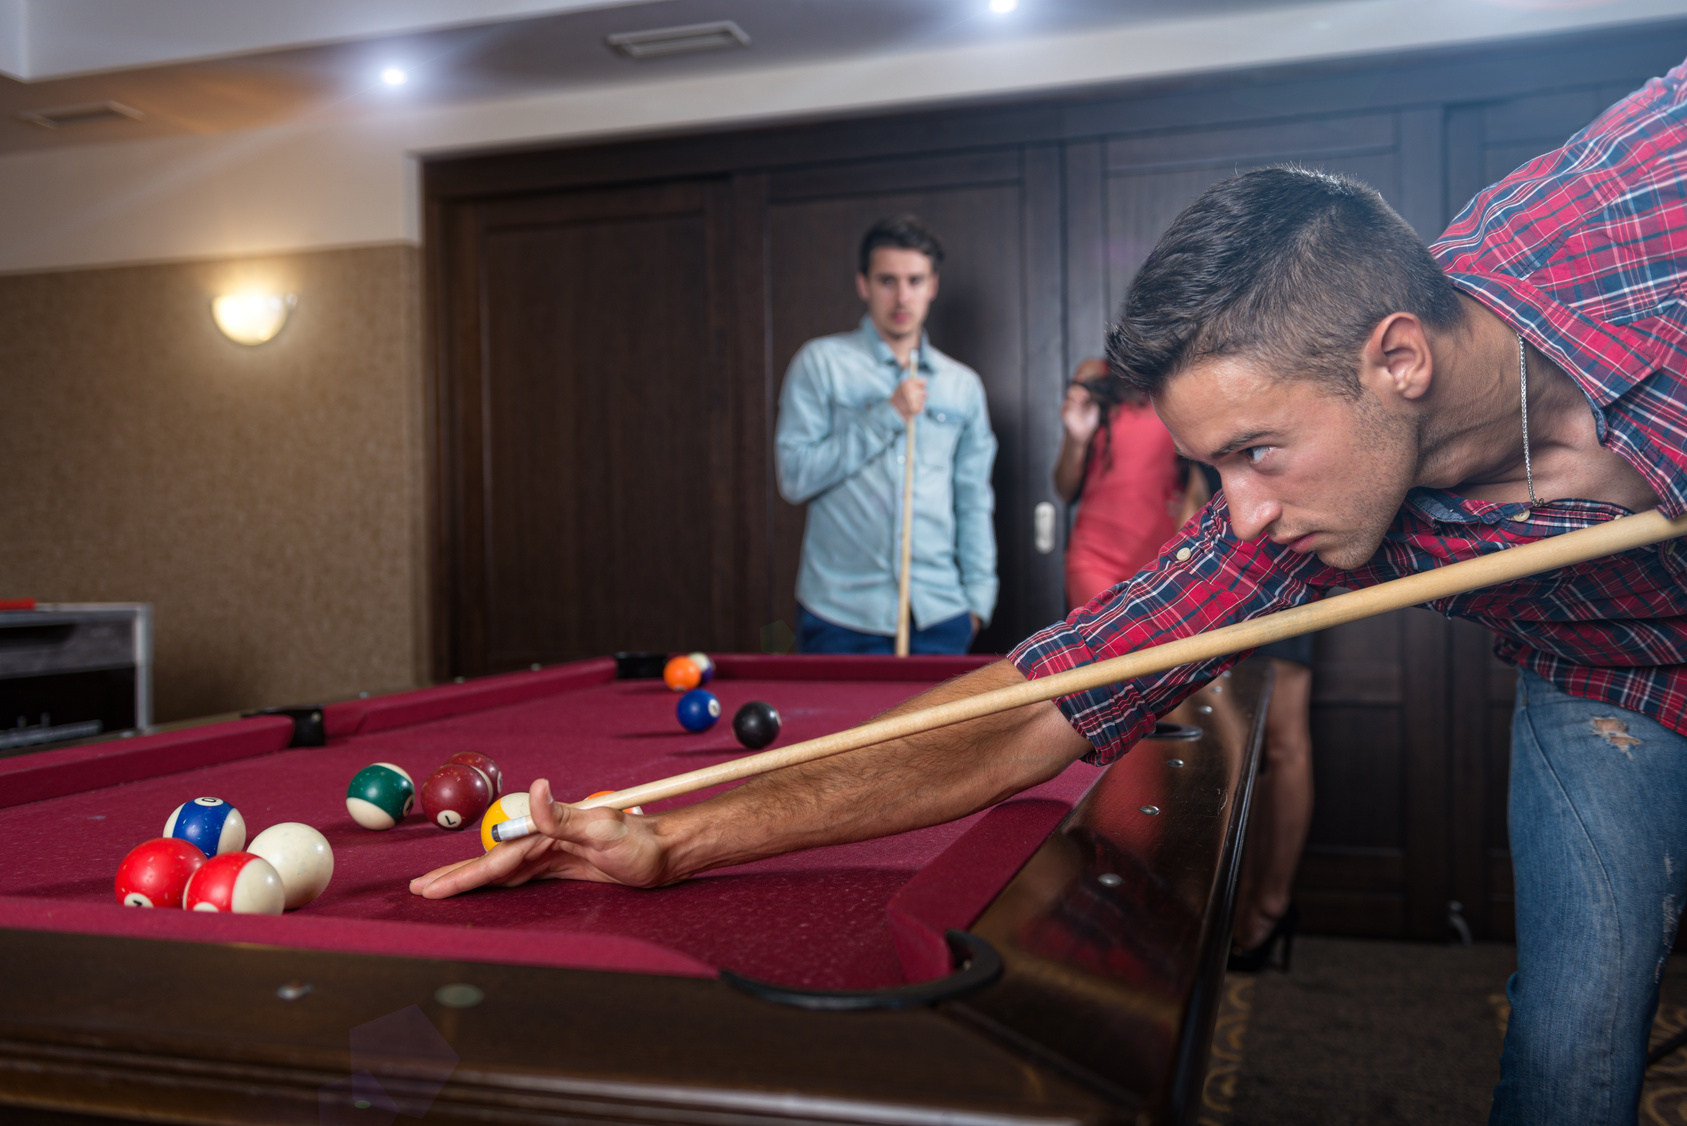 Fun with friends during playing billiard